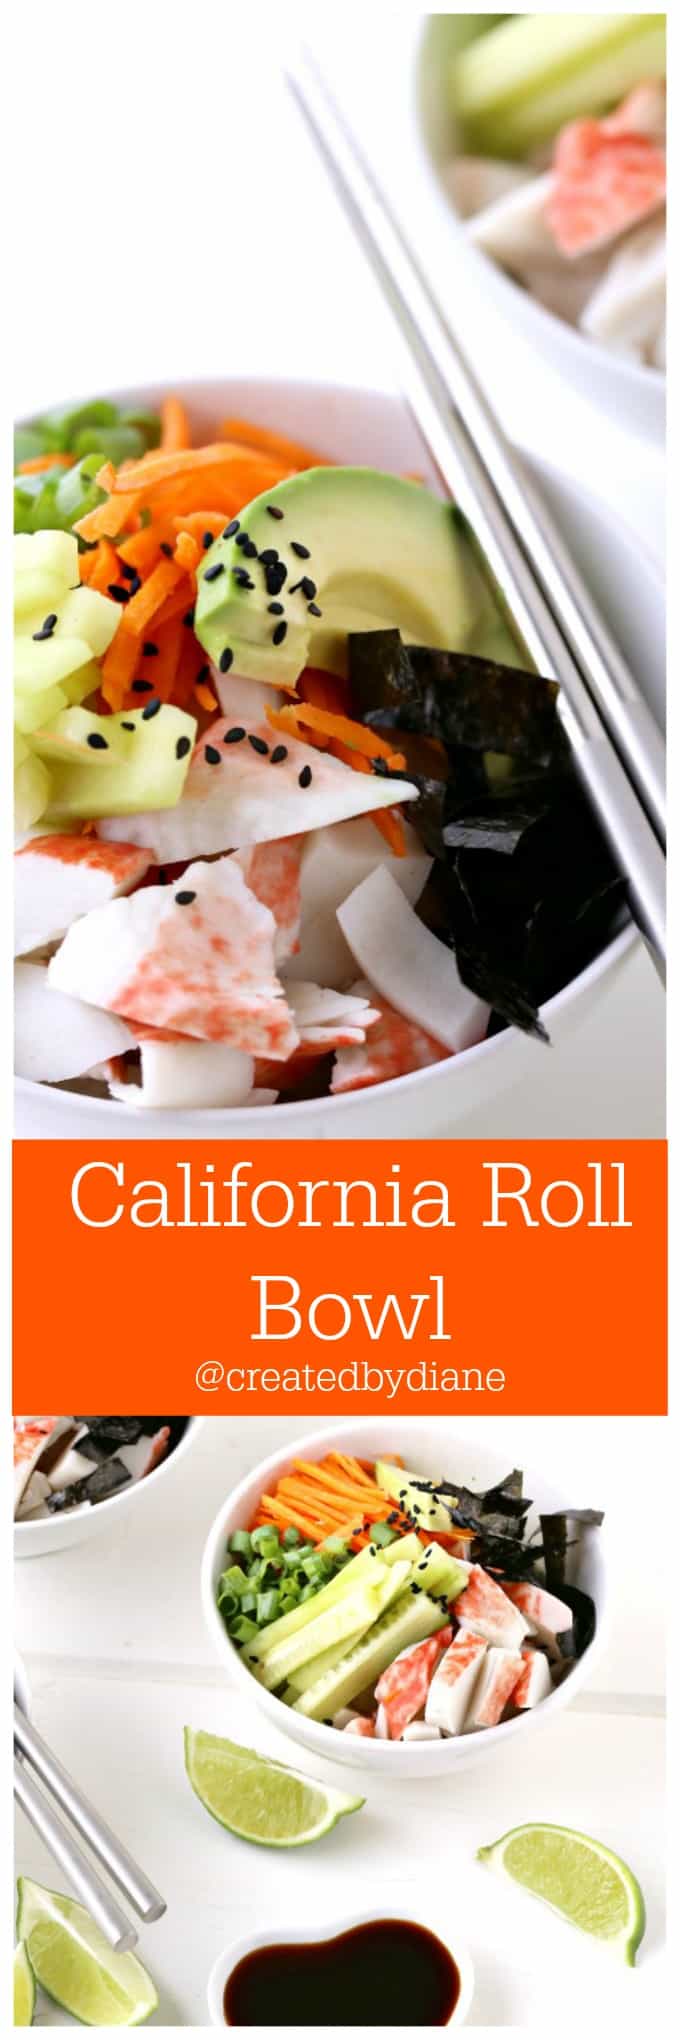 California Roll Bowl it's the perfect easiest Cali Roll to make at home @createdbydiane